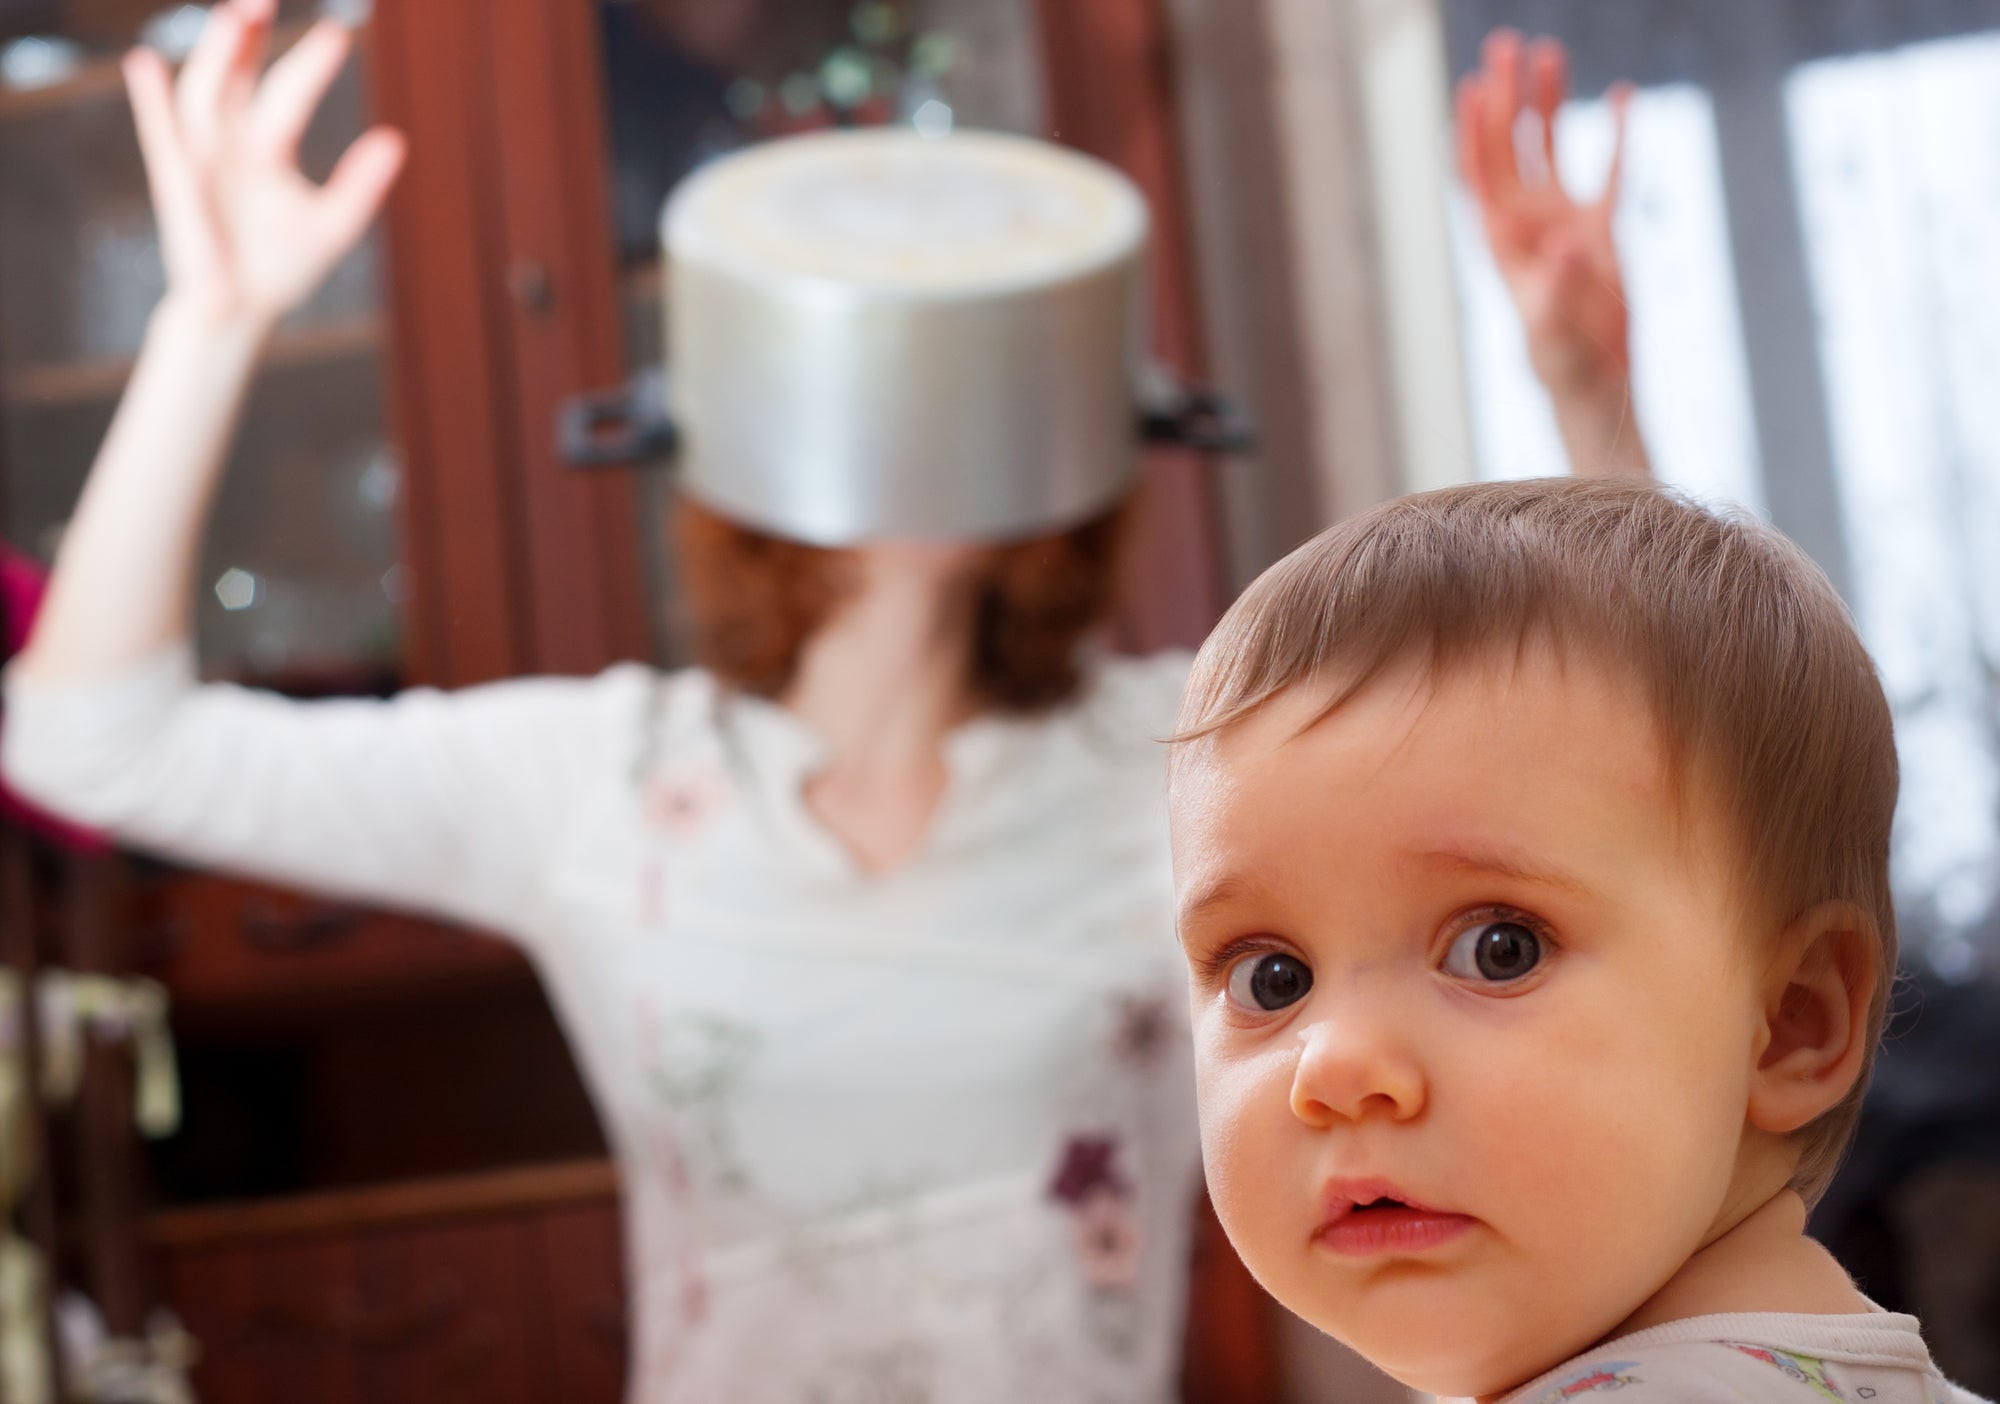 Toddler looks at us as mother is stressed in the background with a pot over her head.